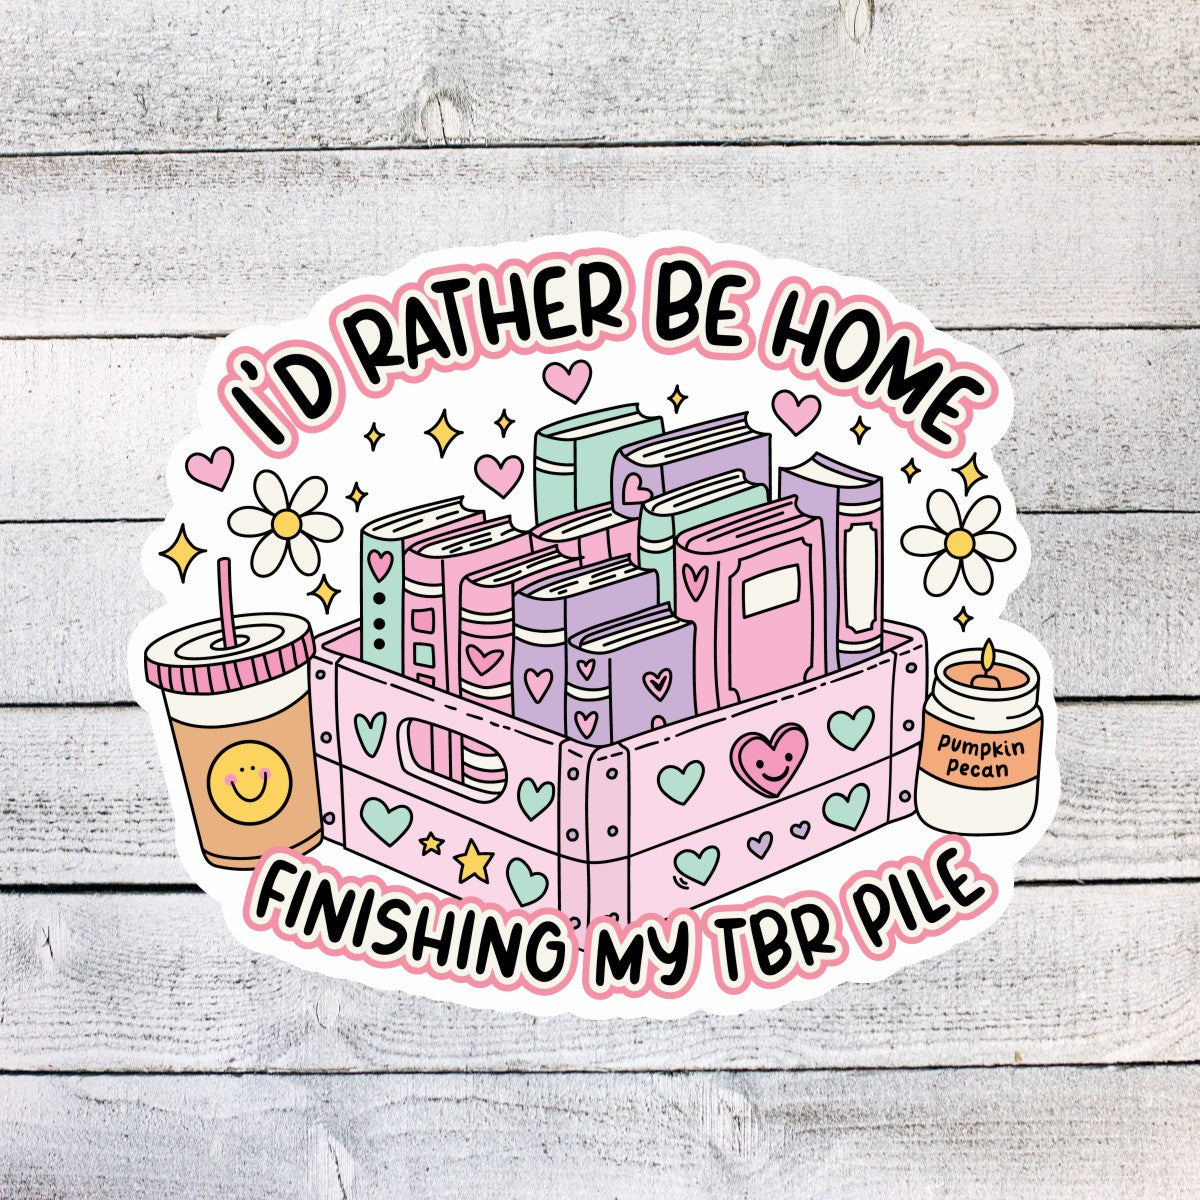 I'd Rather Be Home Finishing by TBR Pile Book Reading Sticker